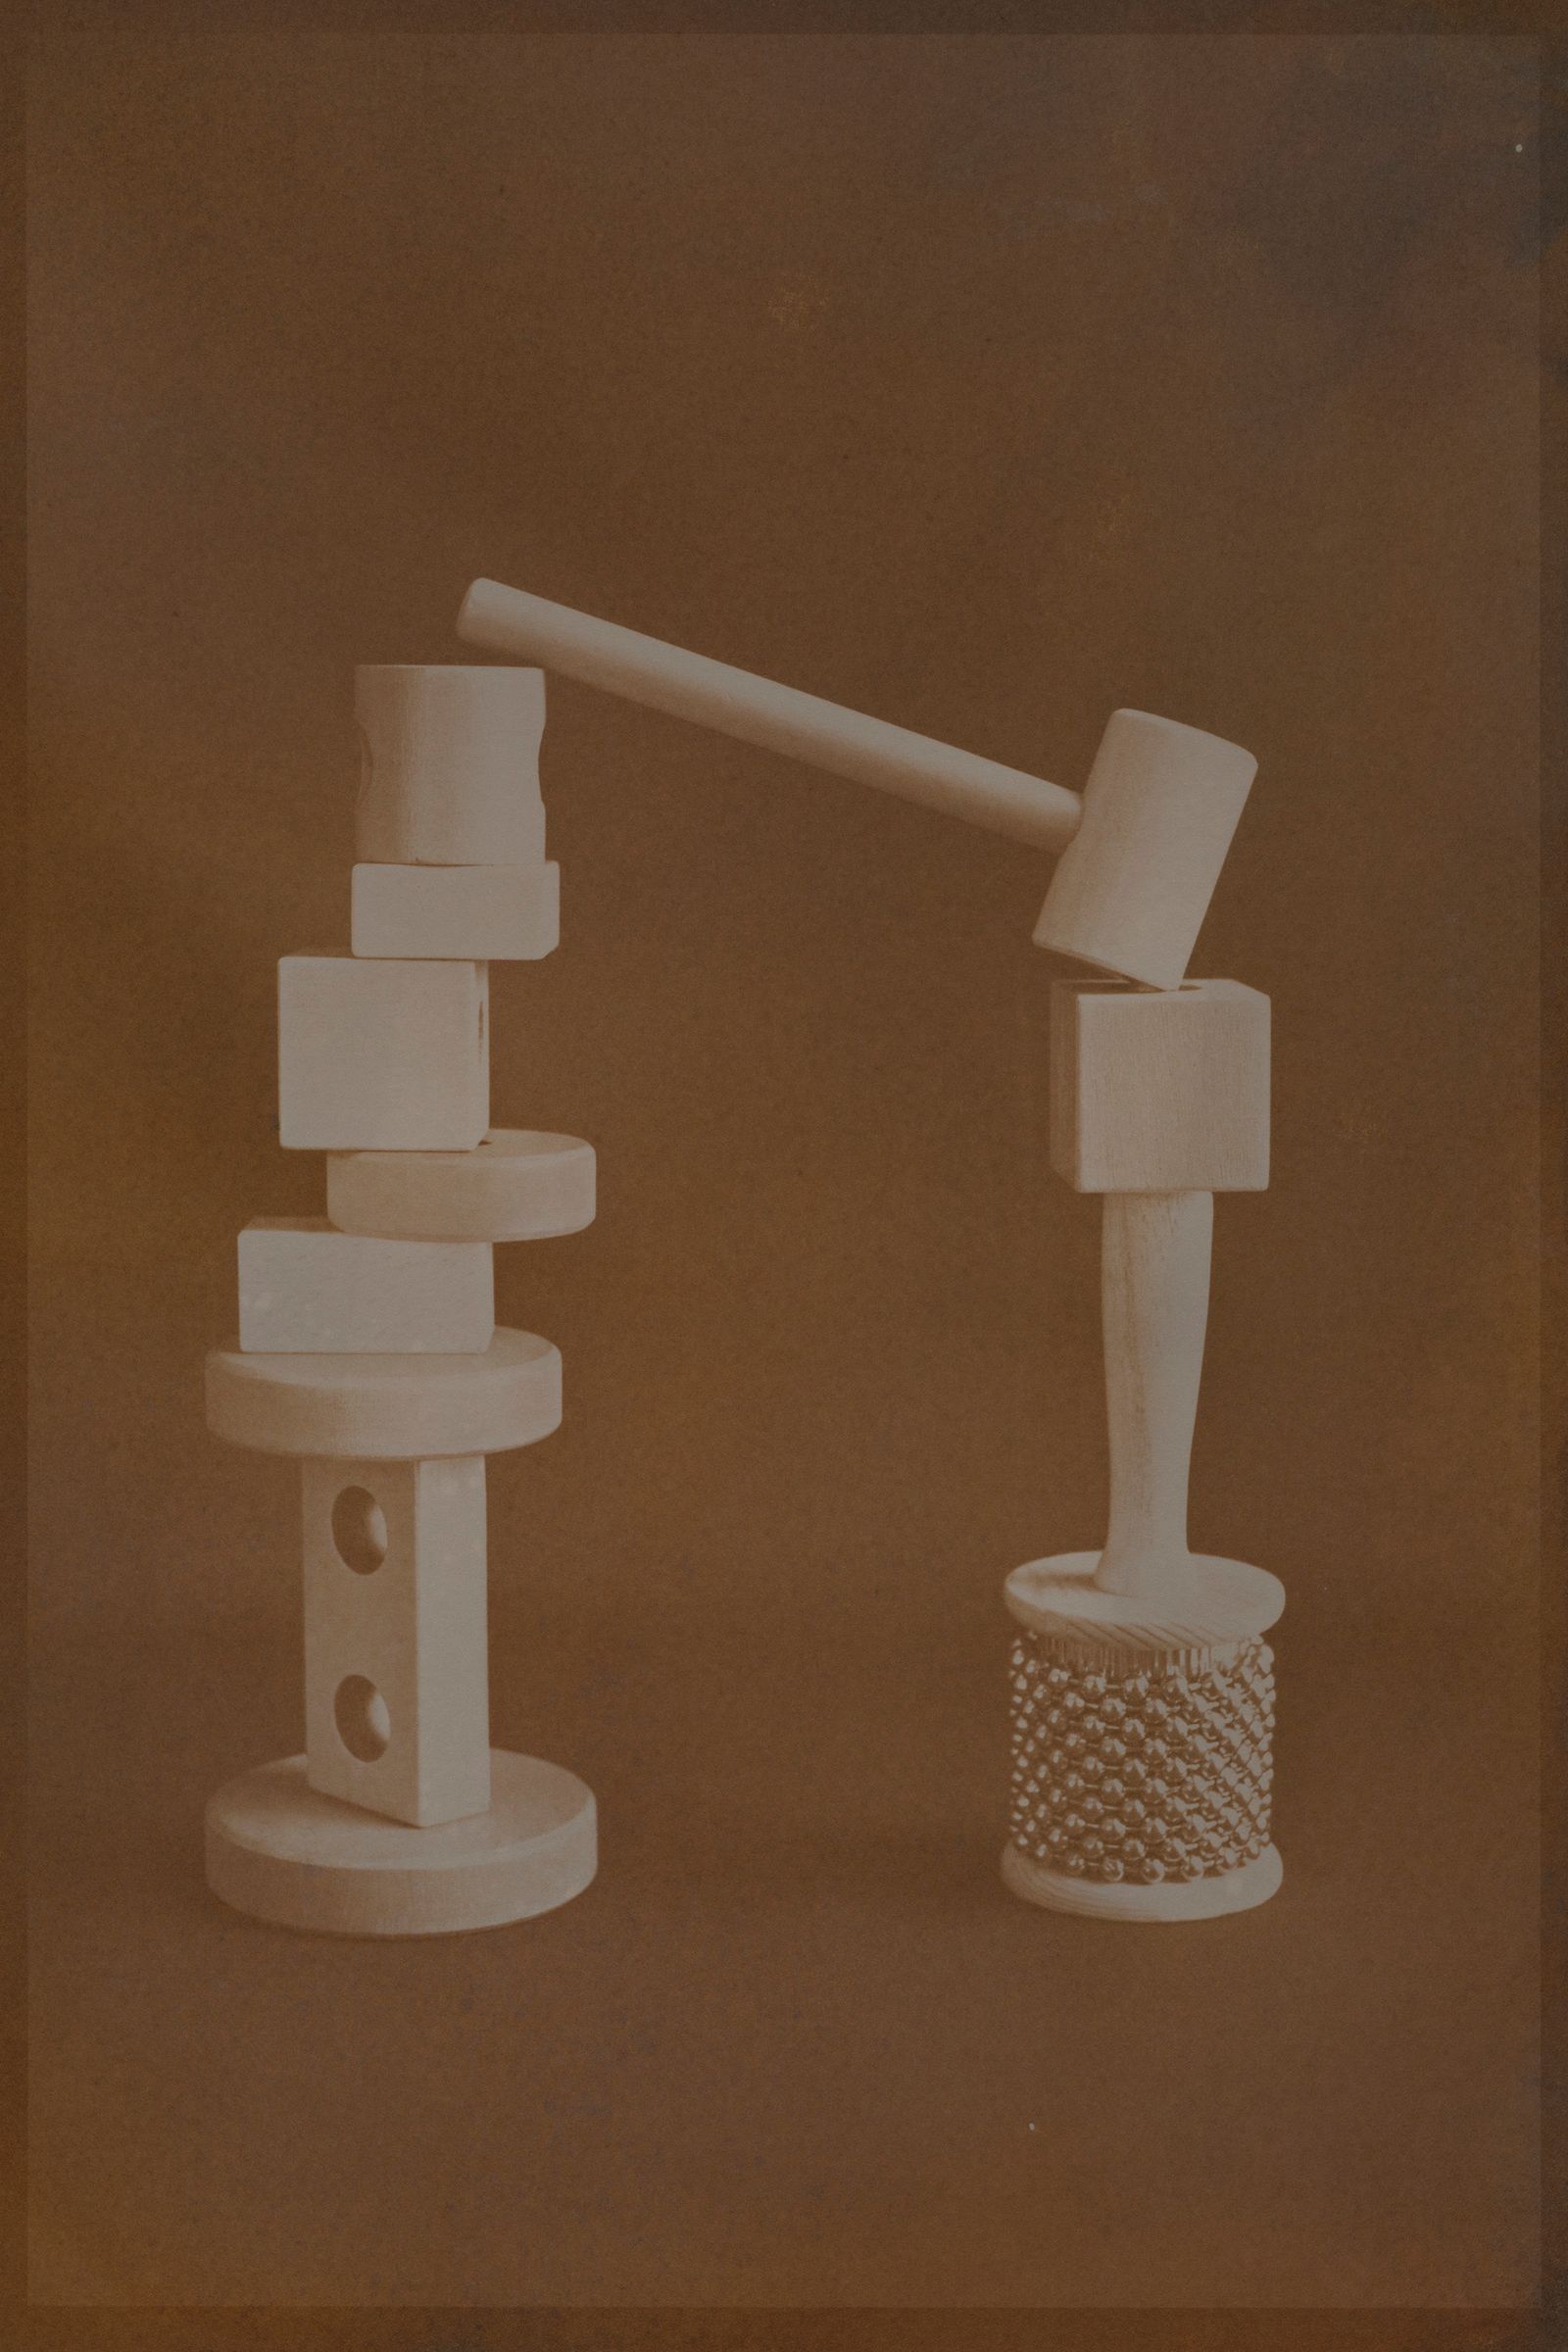 © Eleanor Oakes - Balancing Act (4), 2022. 9x13.5" Salted Paper Print made with Breastmilk.